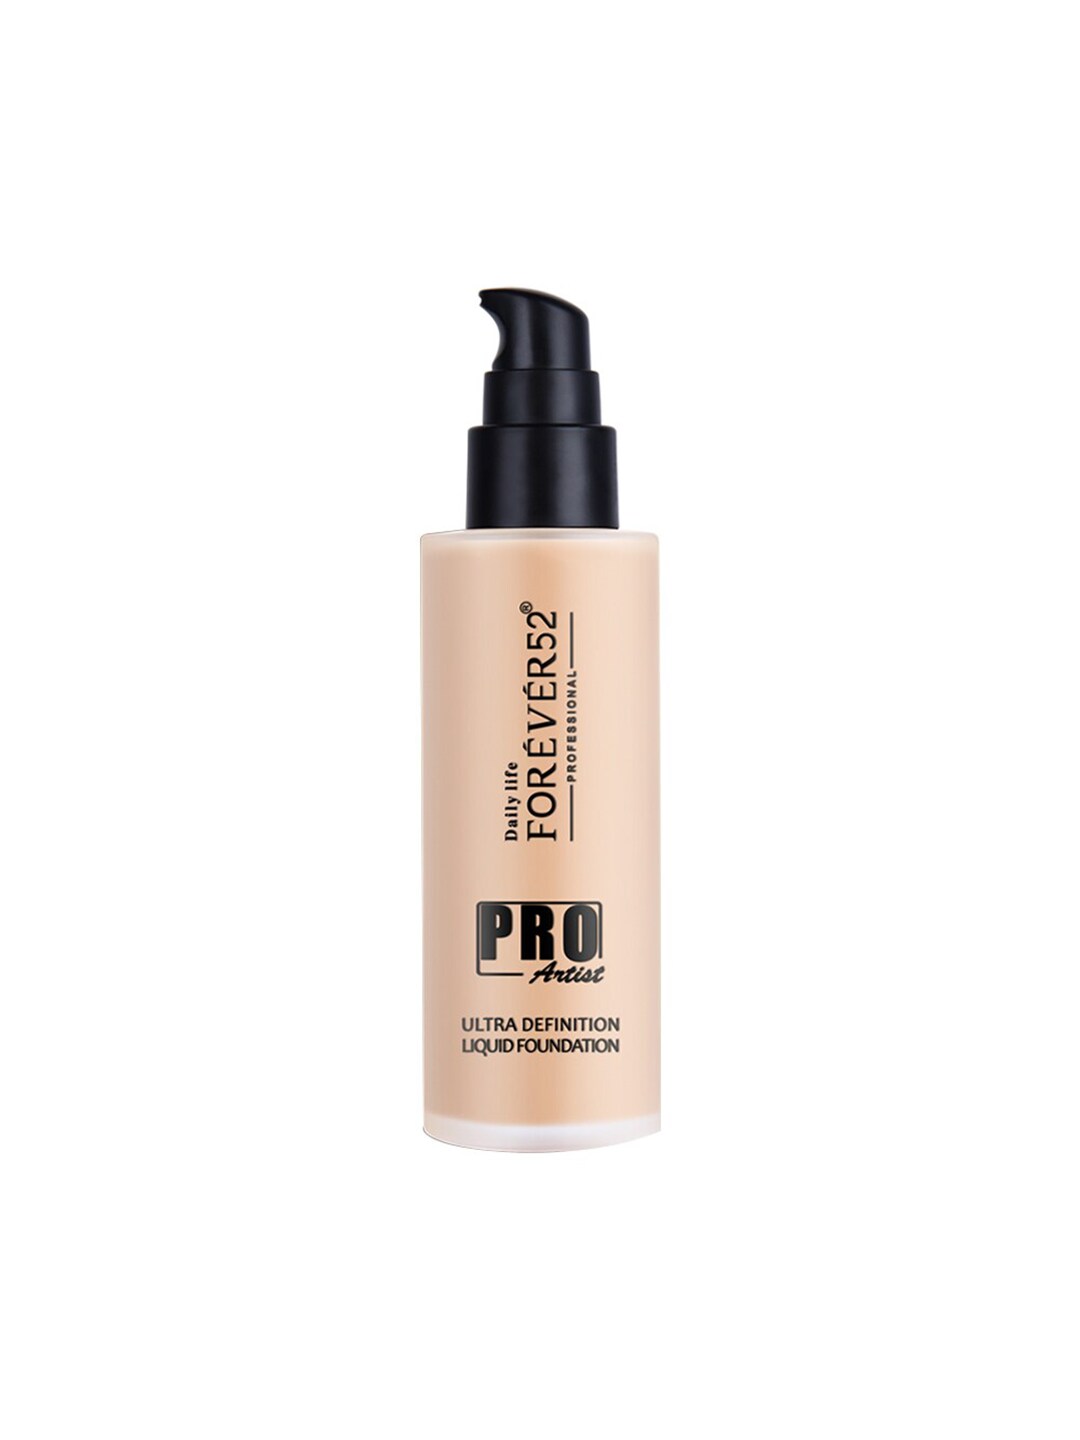 Daily Life Forever52 Women Pro Artist Ultra Definition Liquid Foundation 60ml Price in India